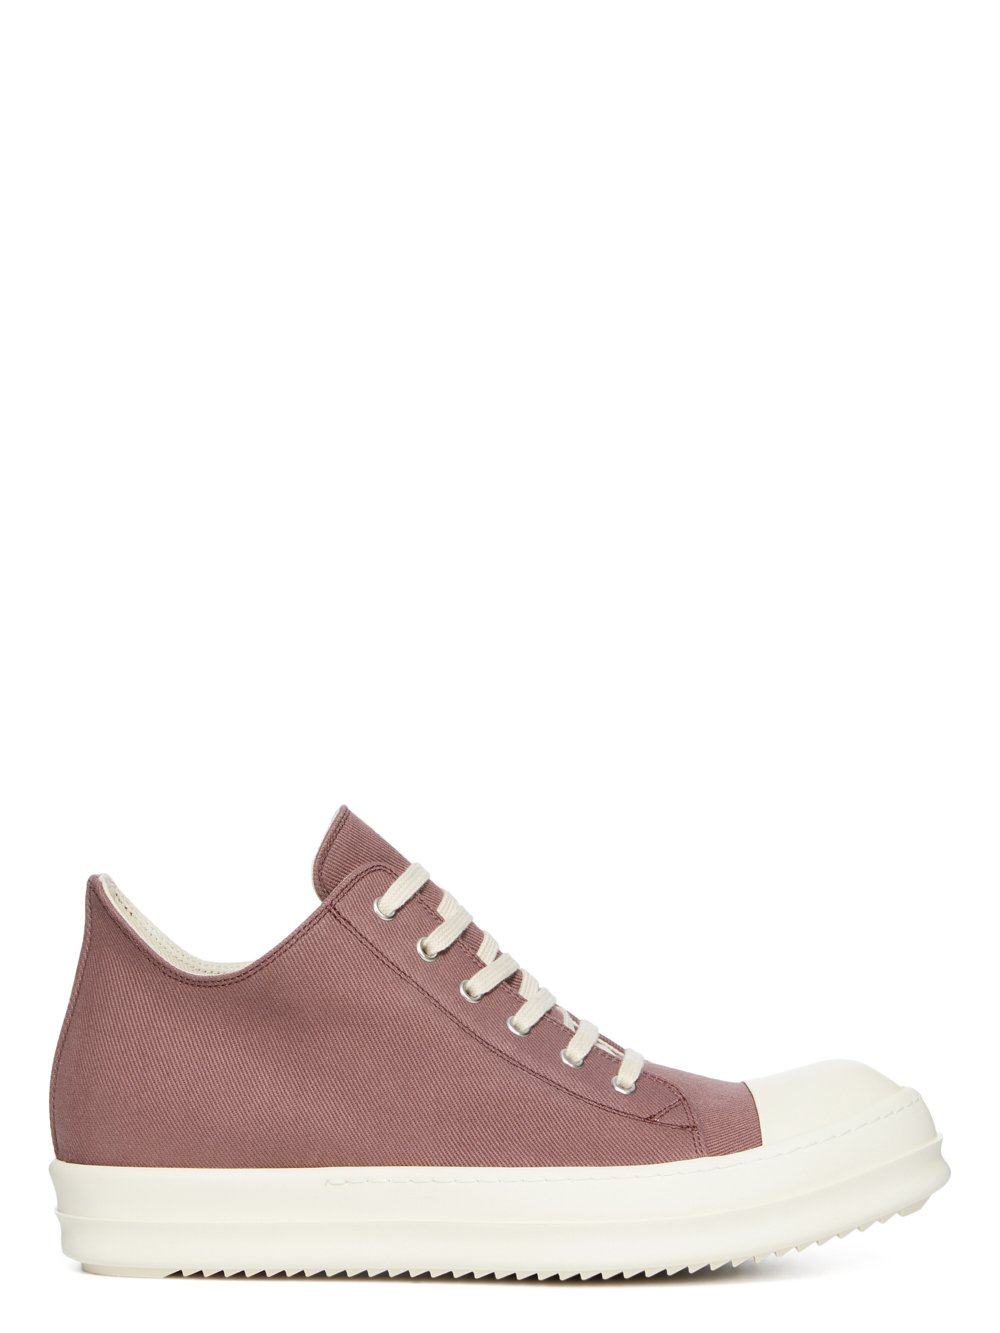 RICK OWENS FW23 LUXOR LOW SNEAKS IN MAUVE AND MILK 13OZ OVERDYED DENIM